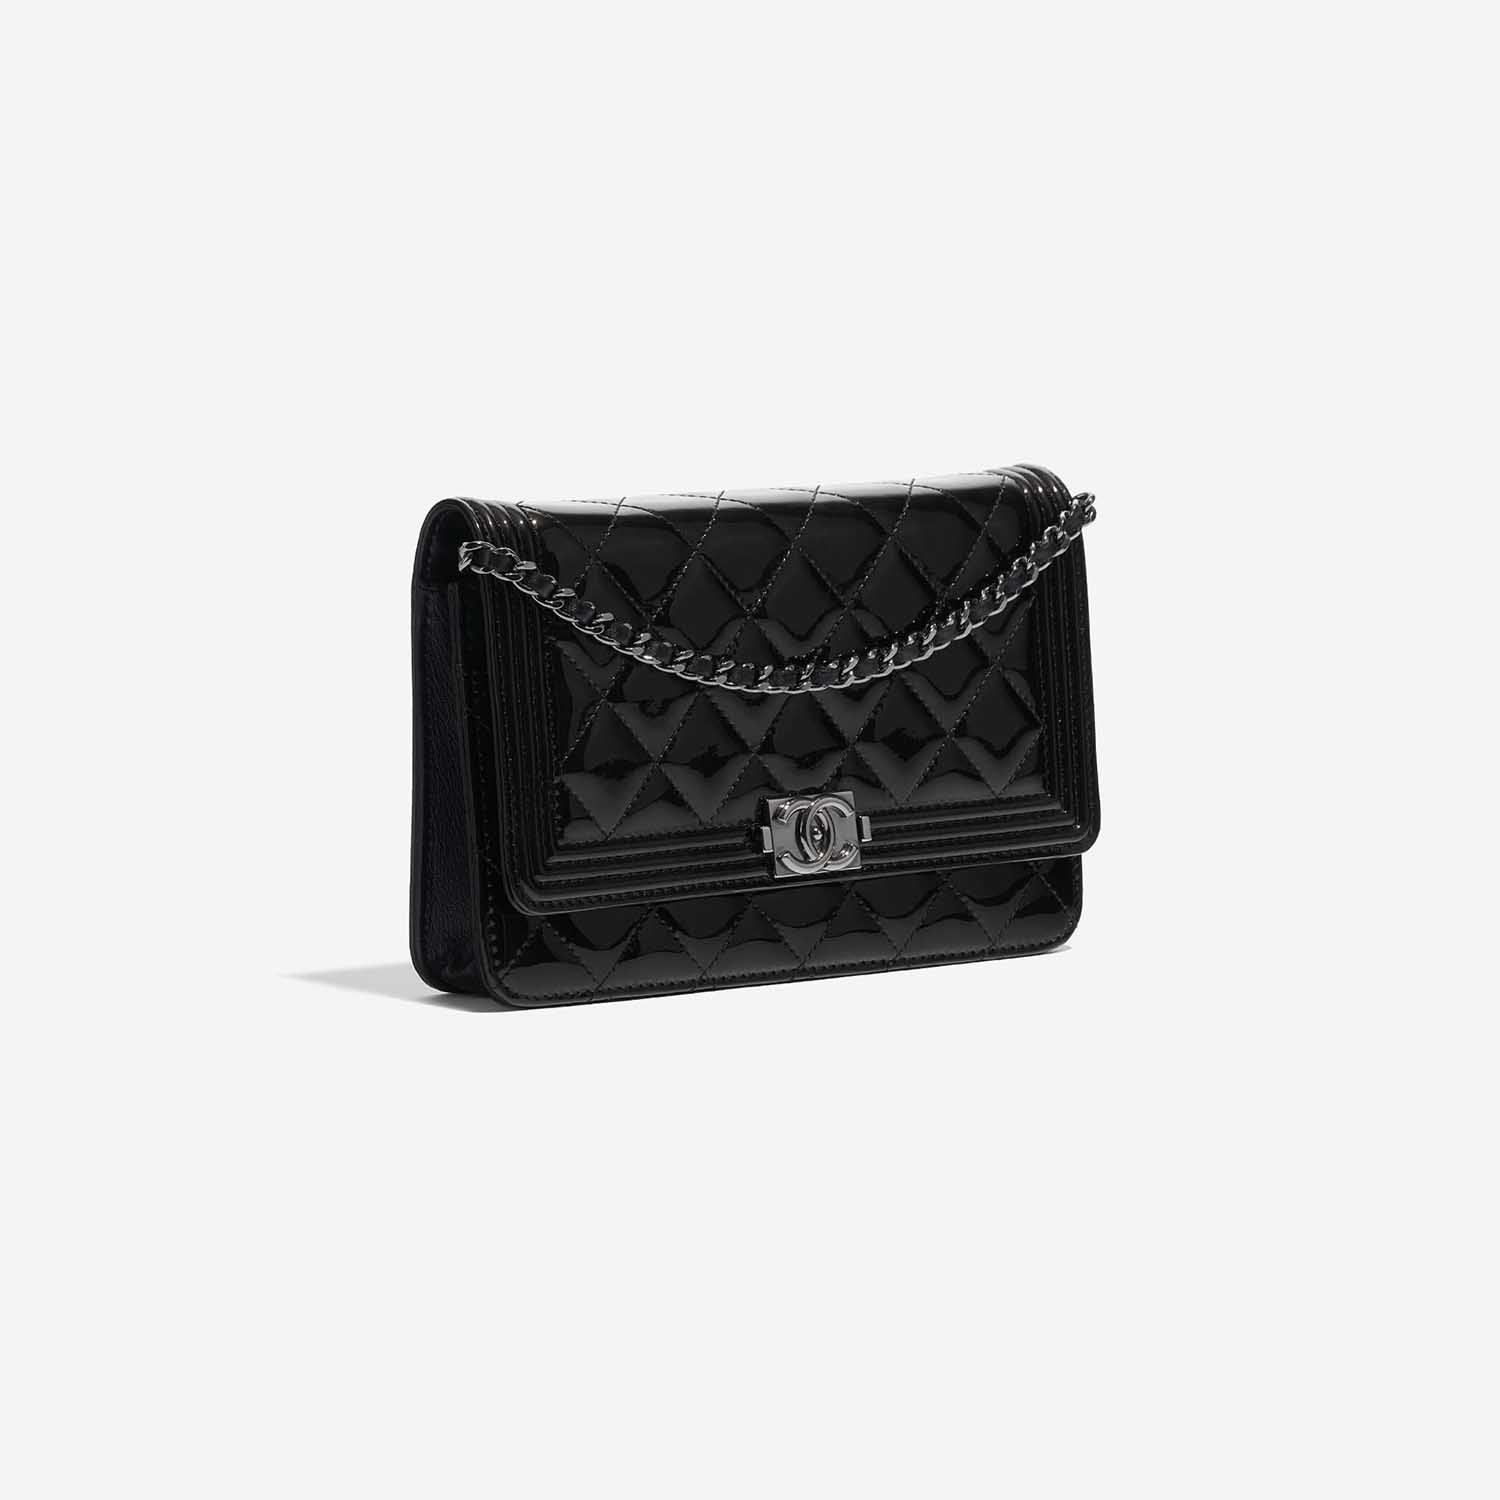 Chanel - Authenticated Wallet on Chain Boy Handbag - Patent Leather Black Plain for Women, Very Good Condition